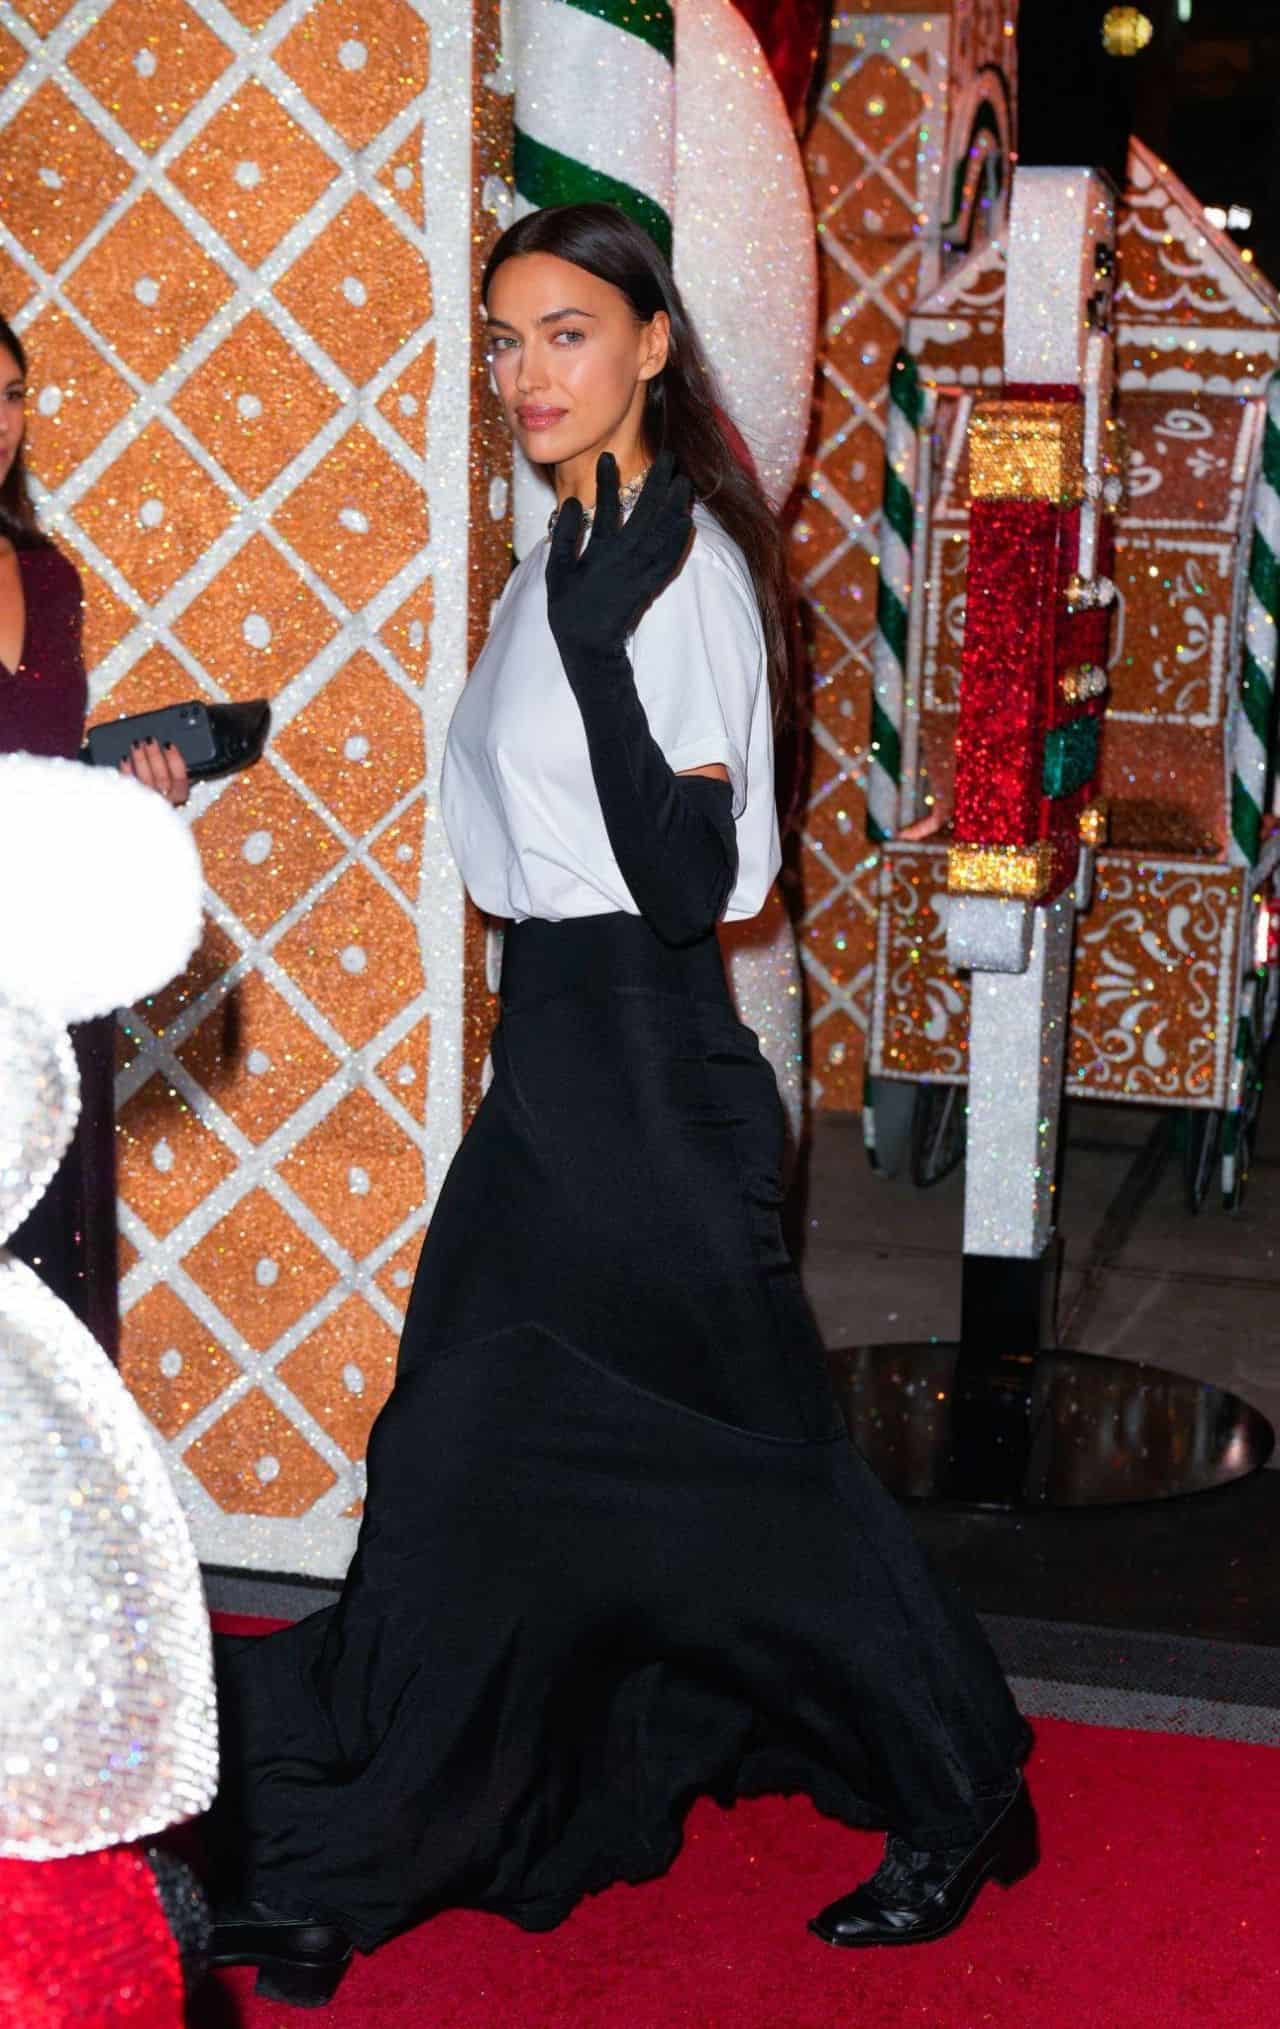 Irina Shayk Wears a Black Fitted Skirt at the Swarovski Holiday Event in NYC